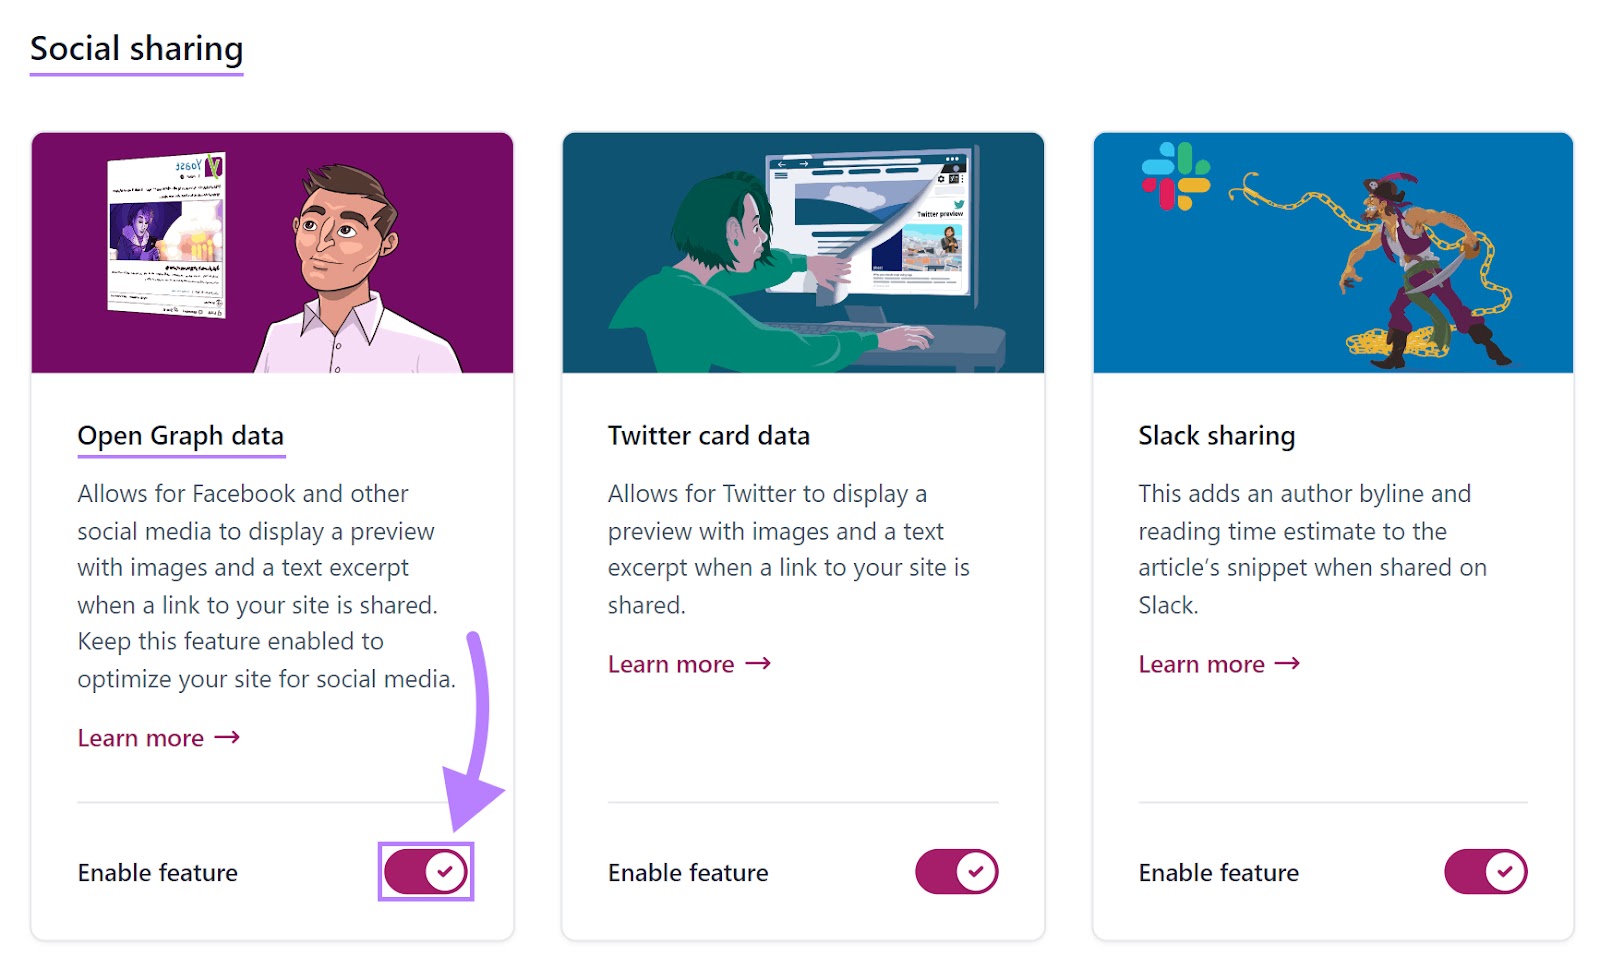 “Open Graph data” widget enabled under "Social Sharing" site feature section of Yoast SEO